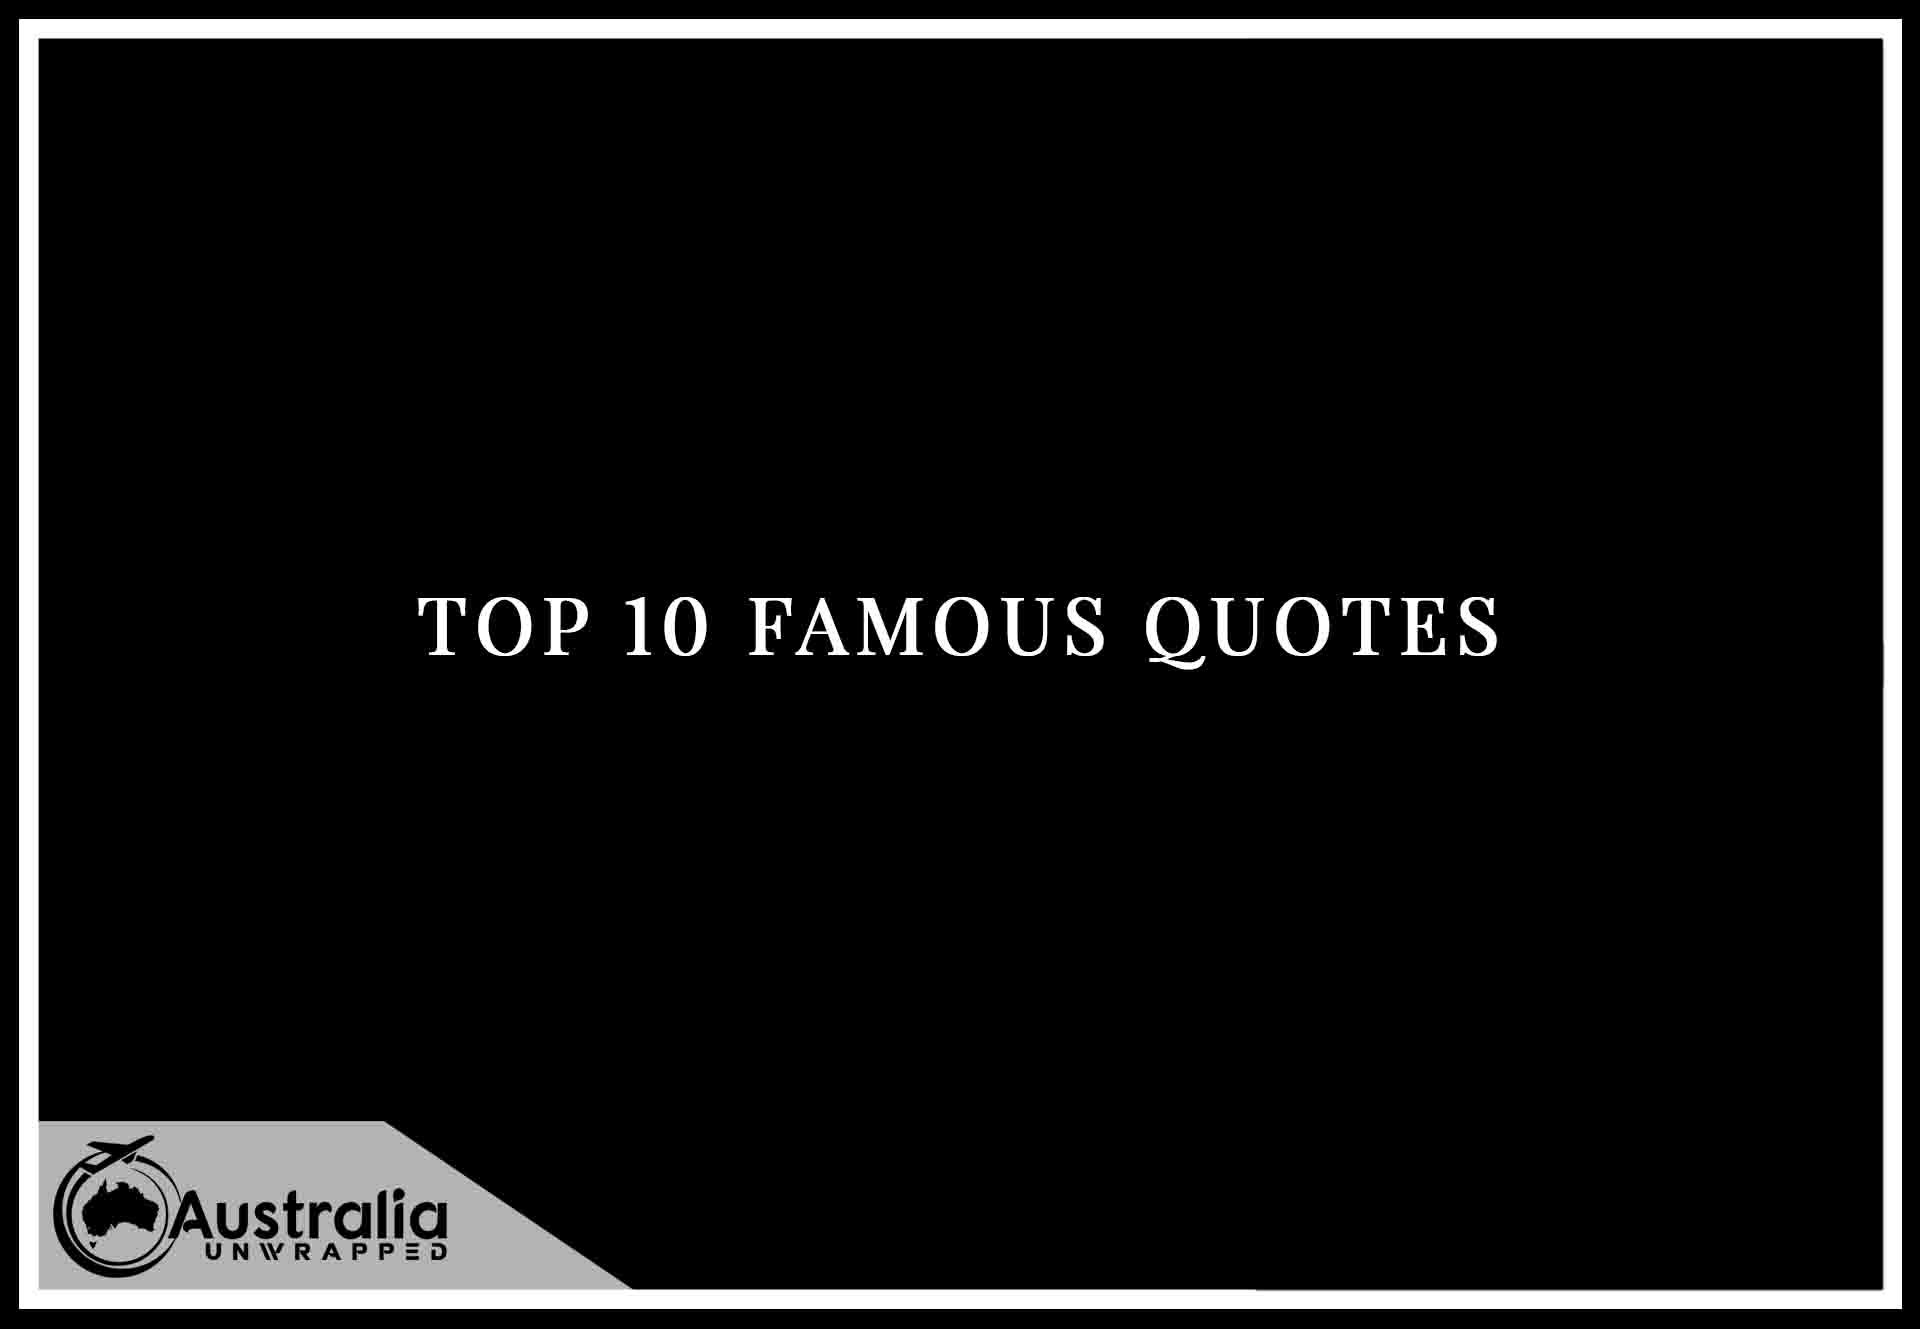 Scott McEwen’s Top 9 Popular and Famous Quotes